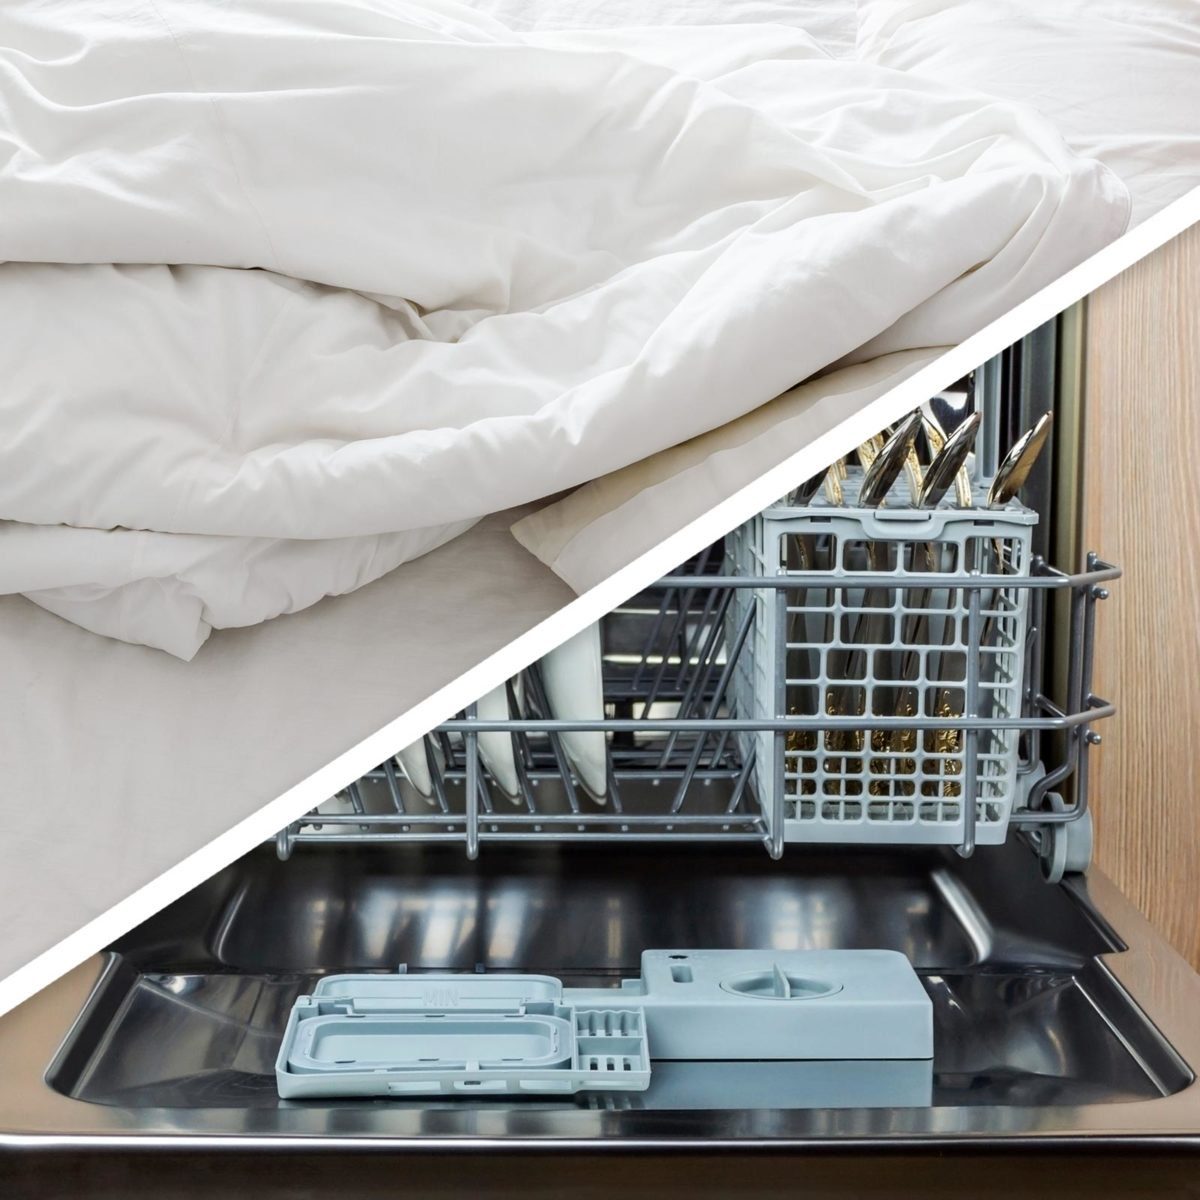 Bed sheets and dishwasher